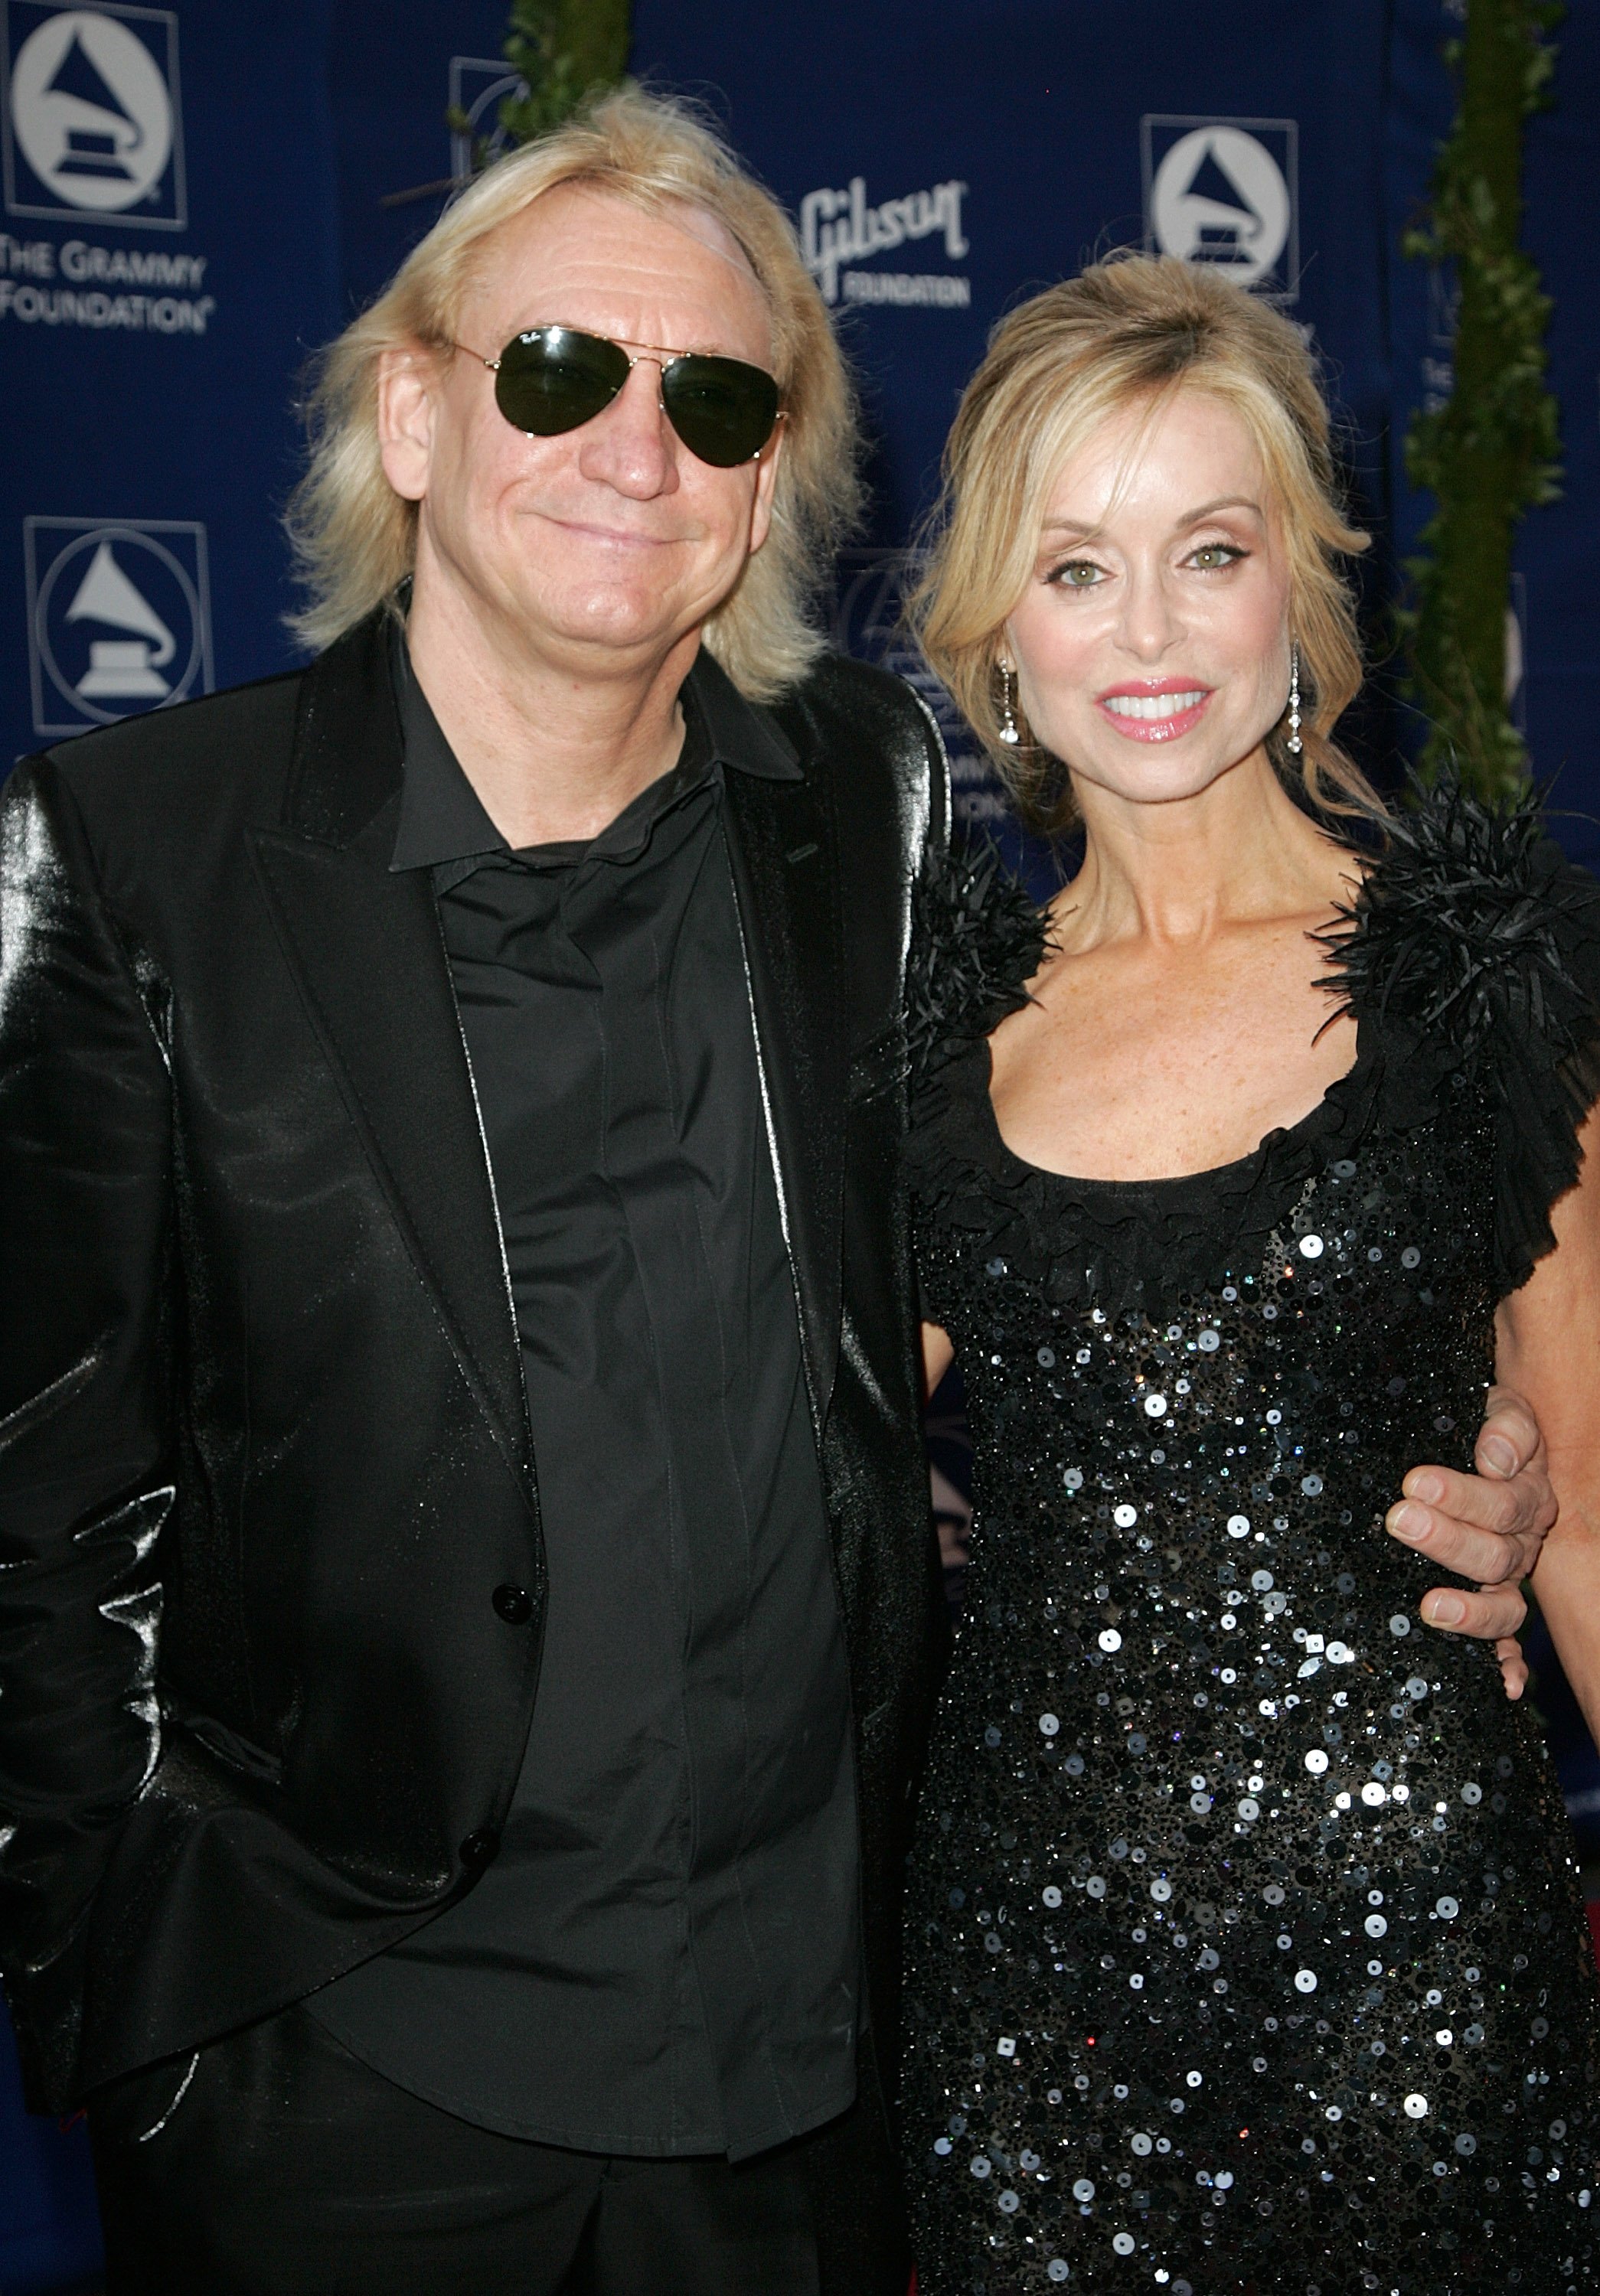 Joe Walsh and Marjorie Bach at the Grammy Foundation's Annual Signature Starry Night Gala in 2008, in Los Angeles, California. | Source: Getty Images